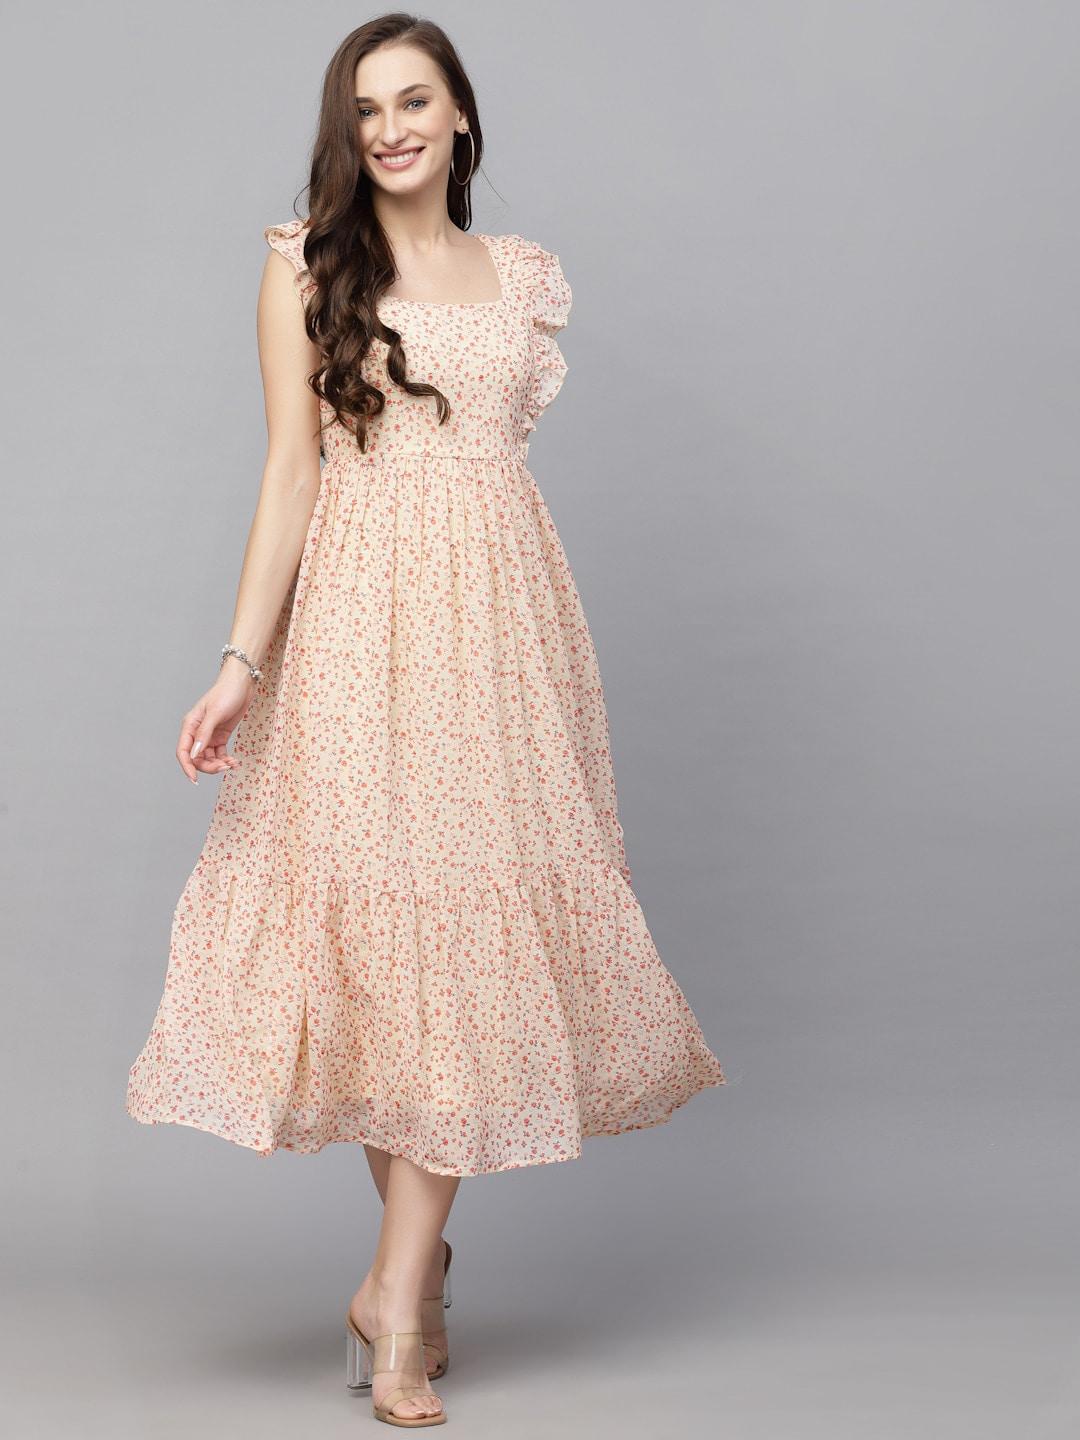 aayu-floral-printed-georgette-fit-and-flare-midi-dress